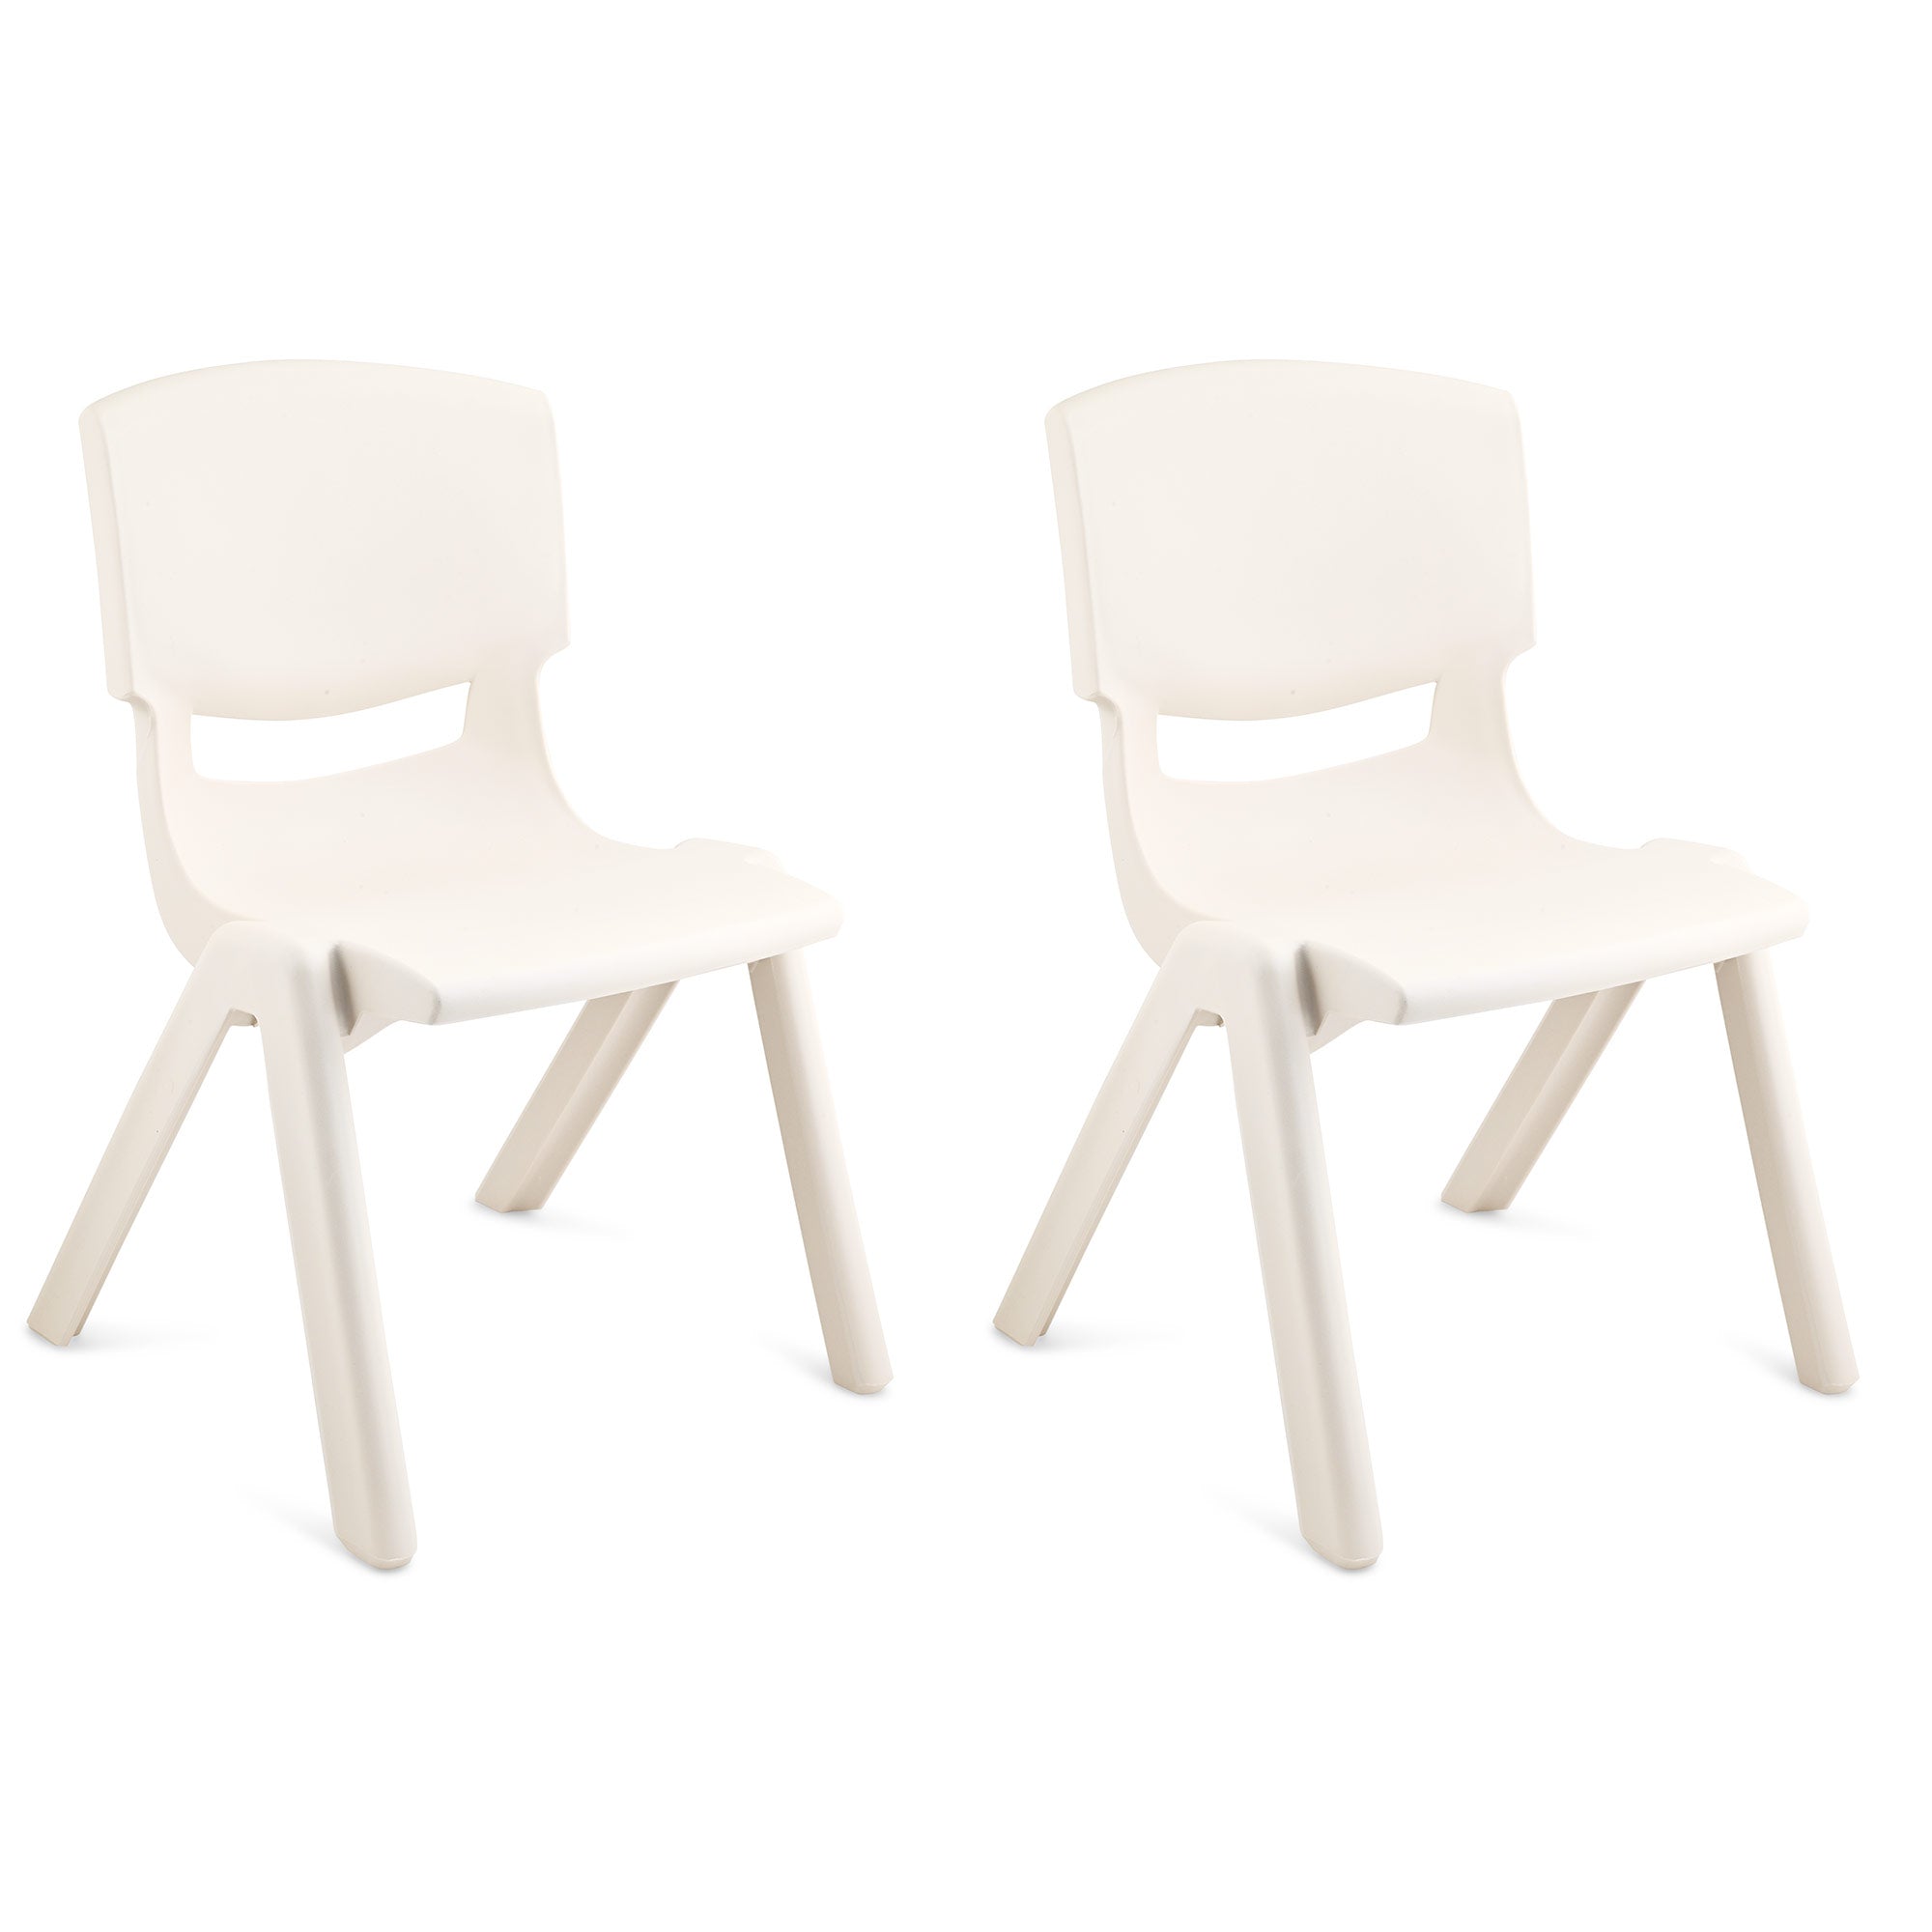 JOON Stackable Plastic Kids Learning Chairs, Ivory, 20.5x12.75X11 Inches, 2-Pack (Pack of 2)